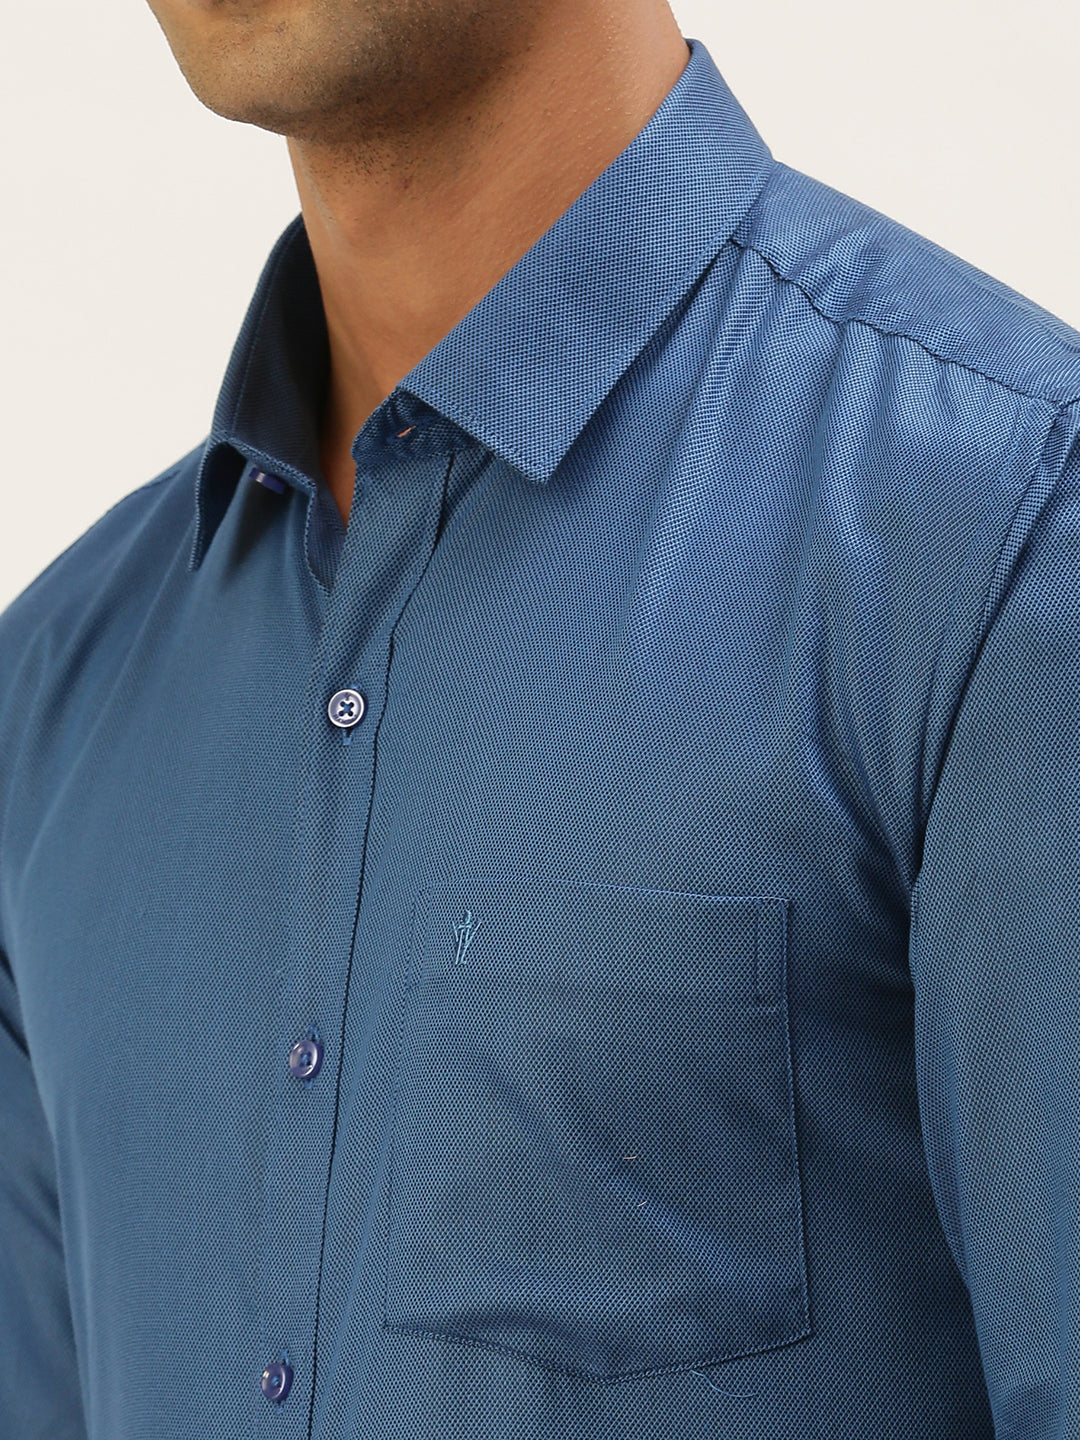 Mens Cotton Formal Shirt Full Sleeves Blue TF7-Zoom view